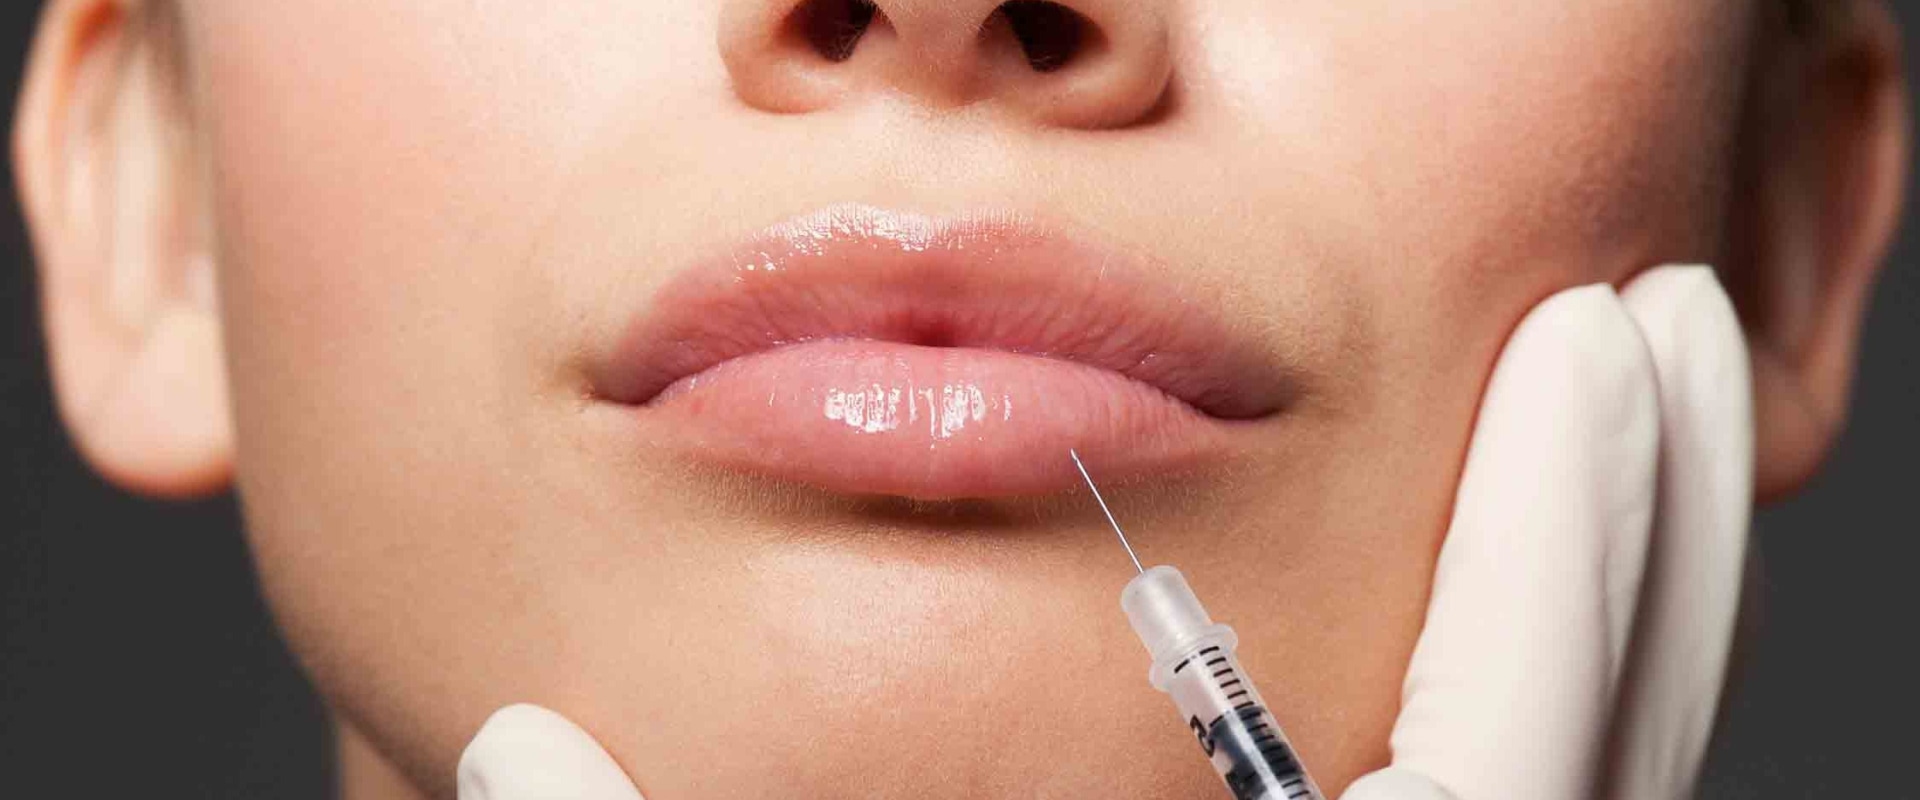 Are juvederm injections painful?